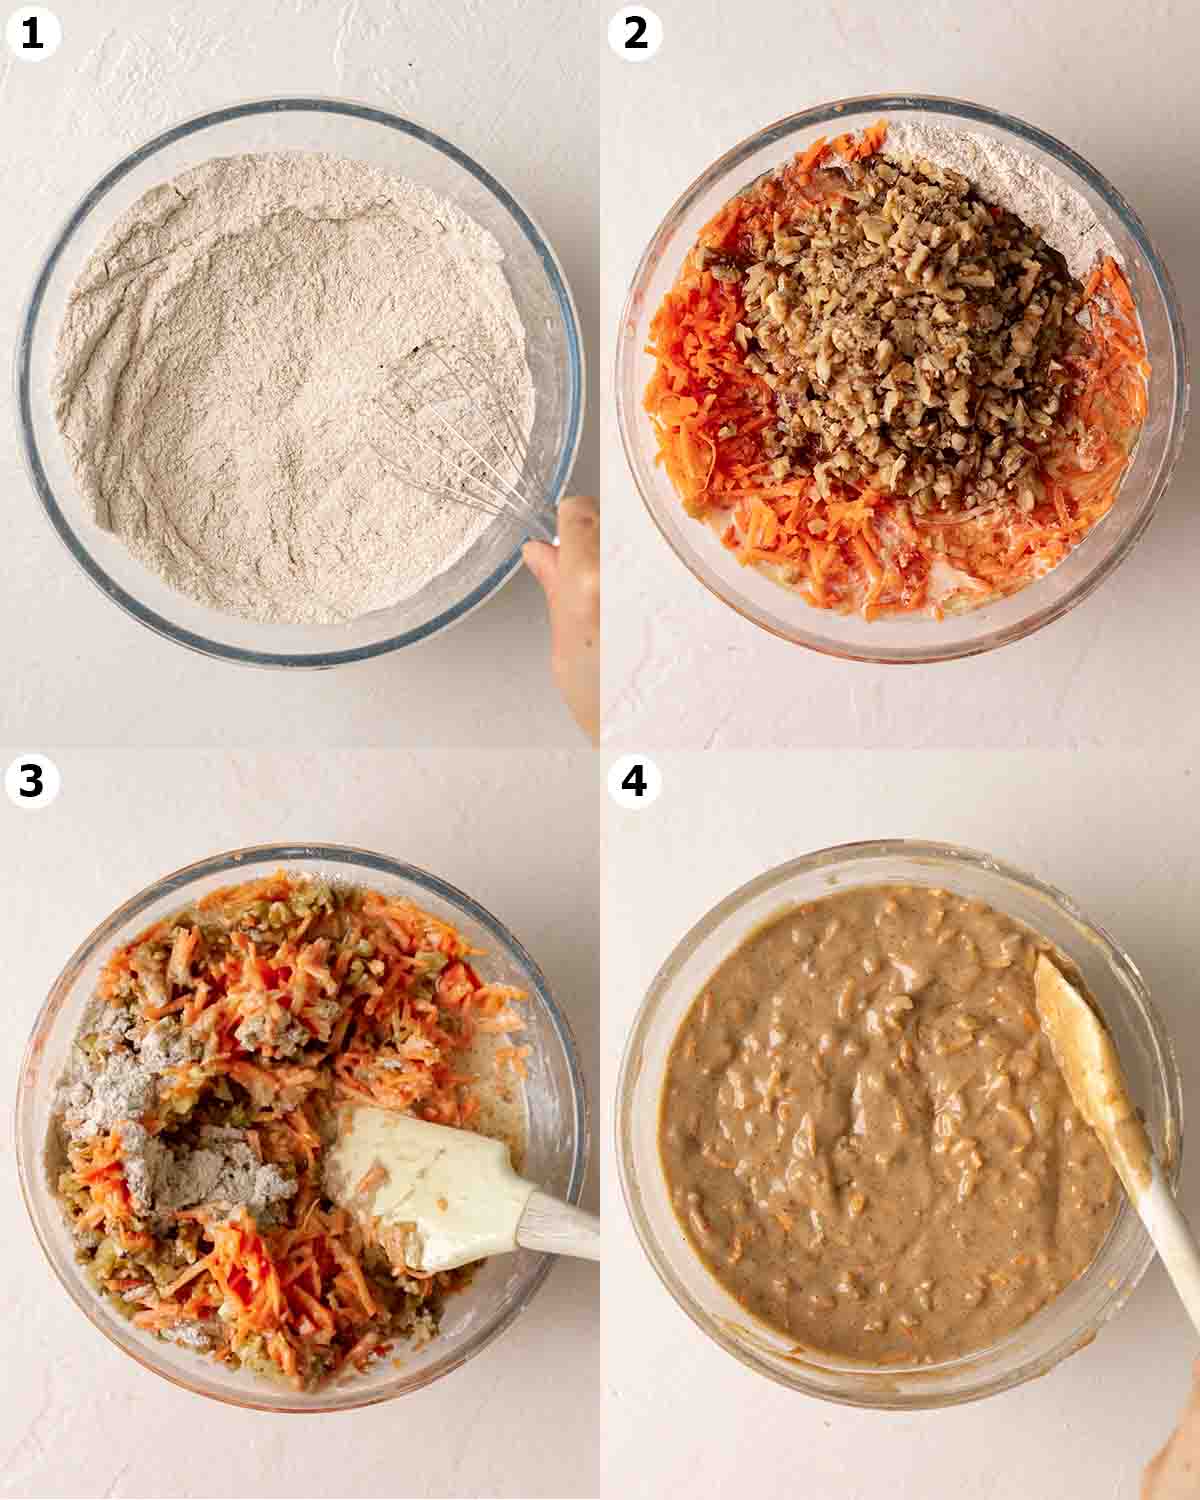 Four image collage showing how to make carrot cake batter in one bowl.